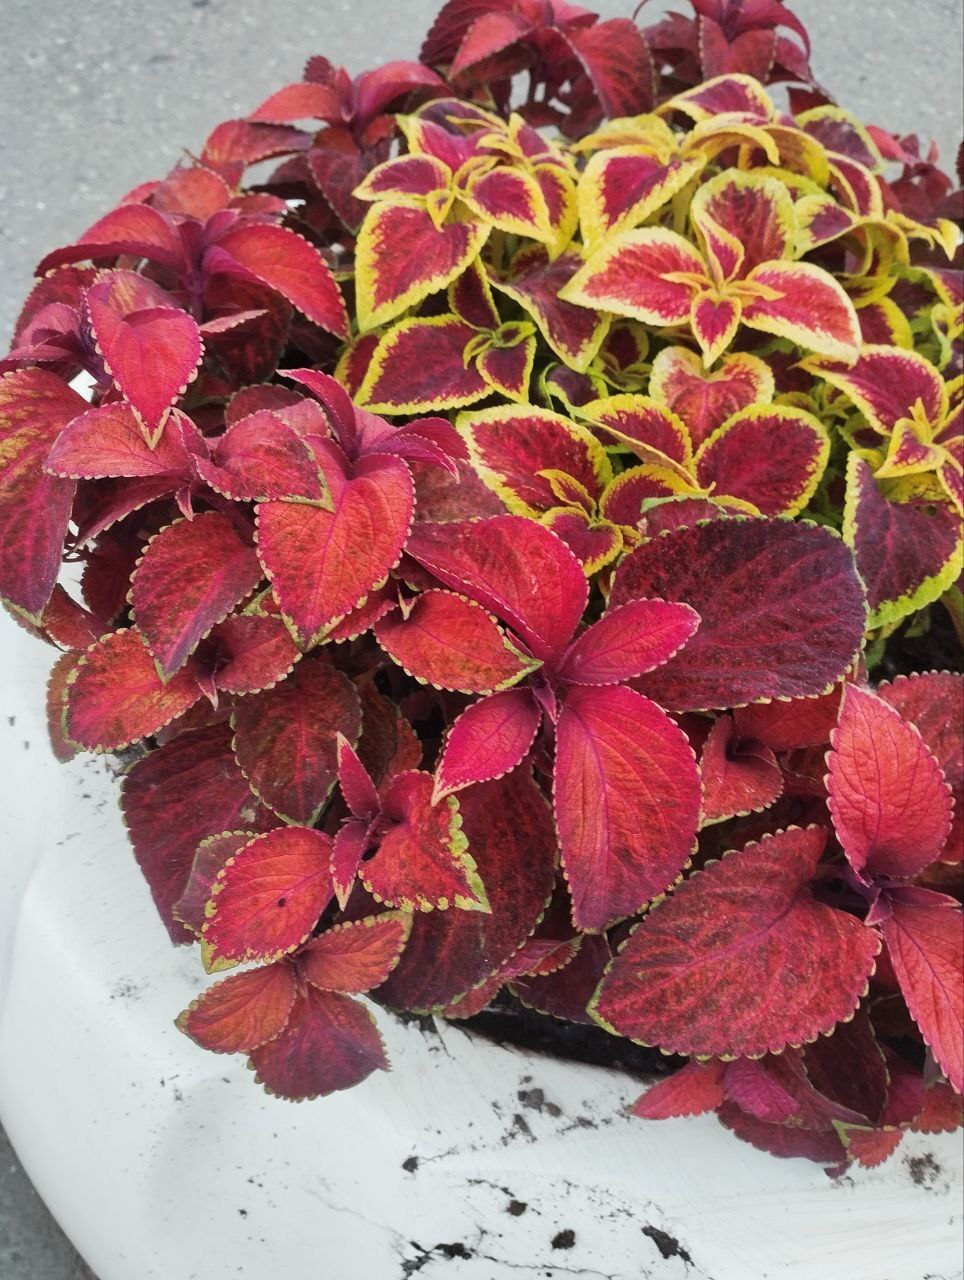 Got an interesting comb - Crossposting, Pikabu publish bot, Coleus, Flower bed, The photo